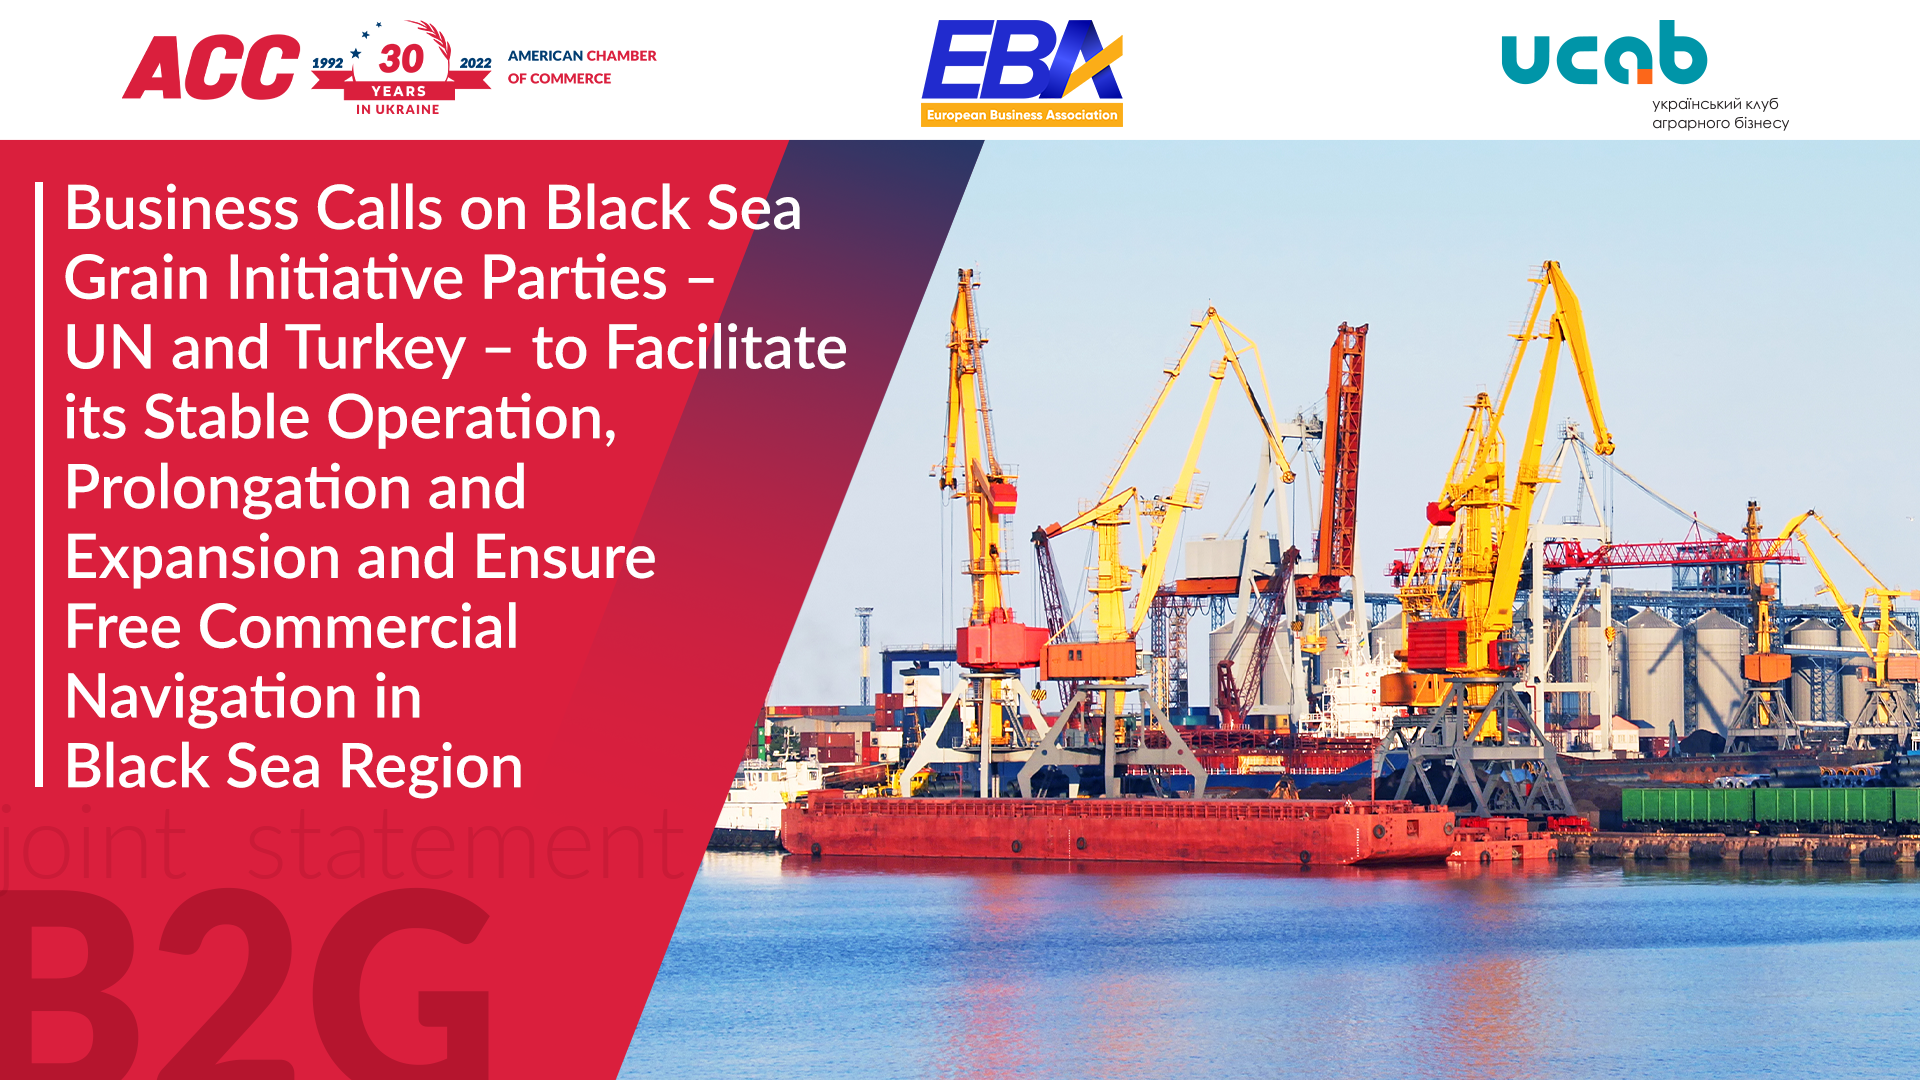 Business Calls on the Black Sea Grain Initiative Parties – UN and Turkey – to Facilitate its Stable Operation, Prolongation and Expansion and Ensure Free Commercial Navigation in the Black Sea Region